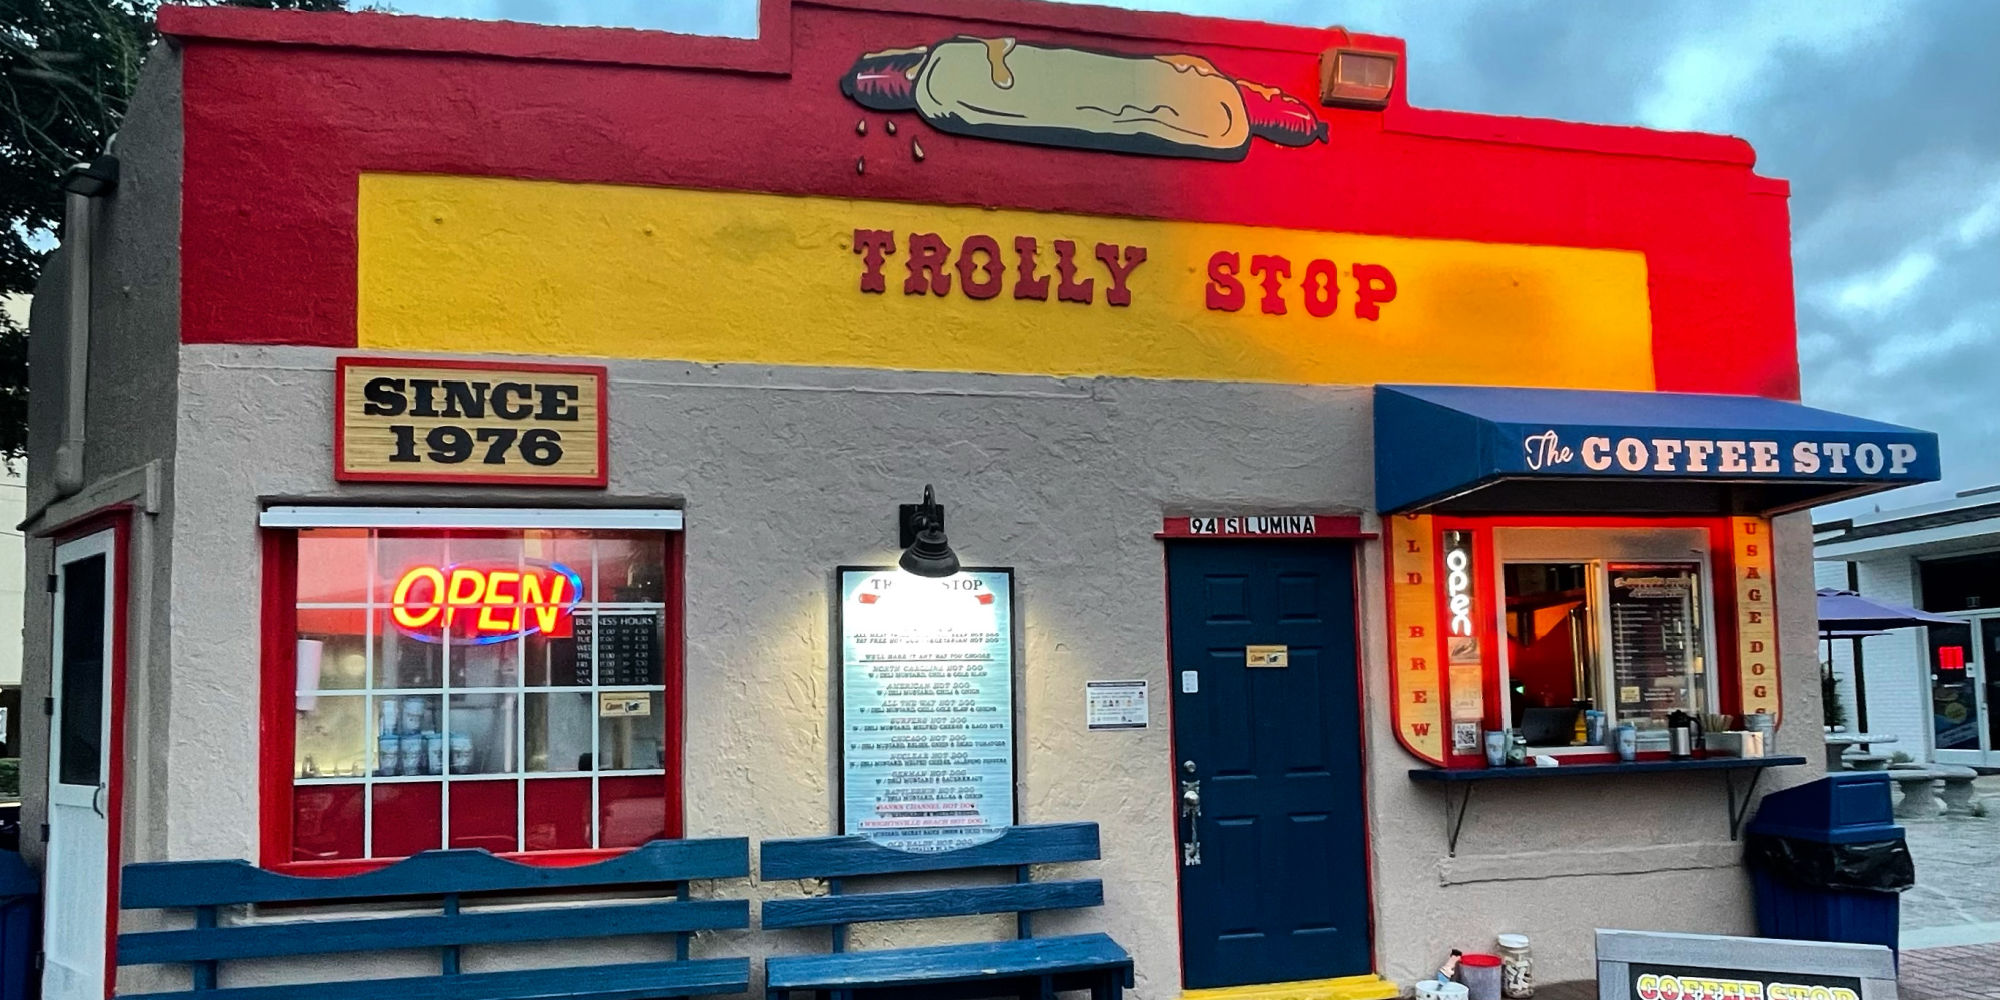 The Trolly Stop